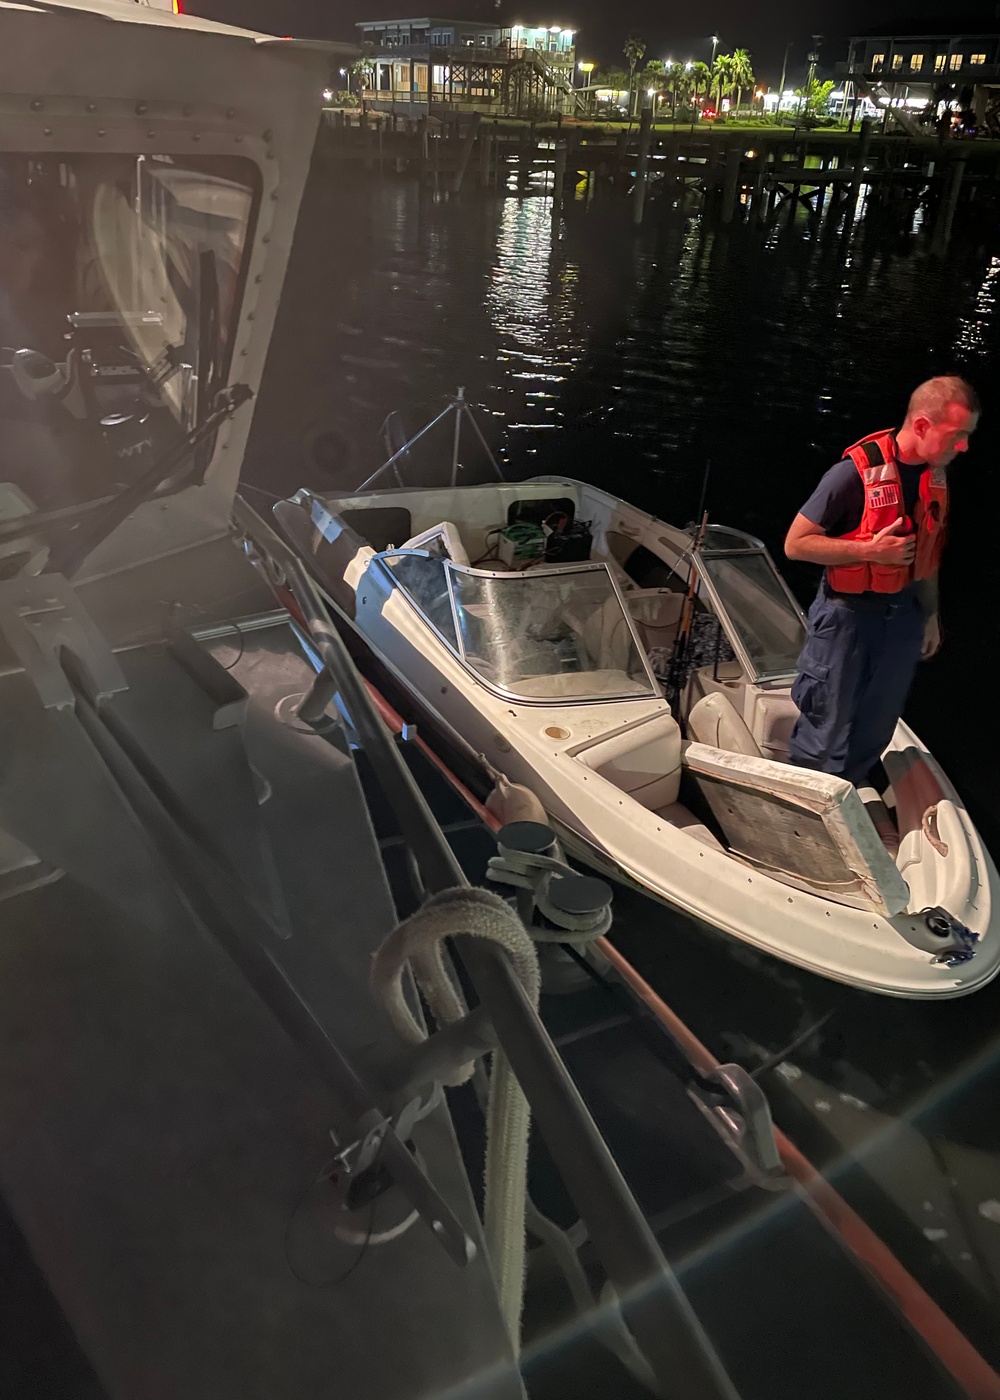 Coast Guard rescues 2 from vessel taking on water near Gulfport, Miss.